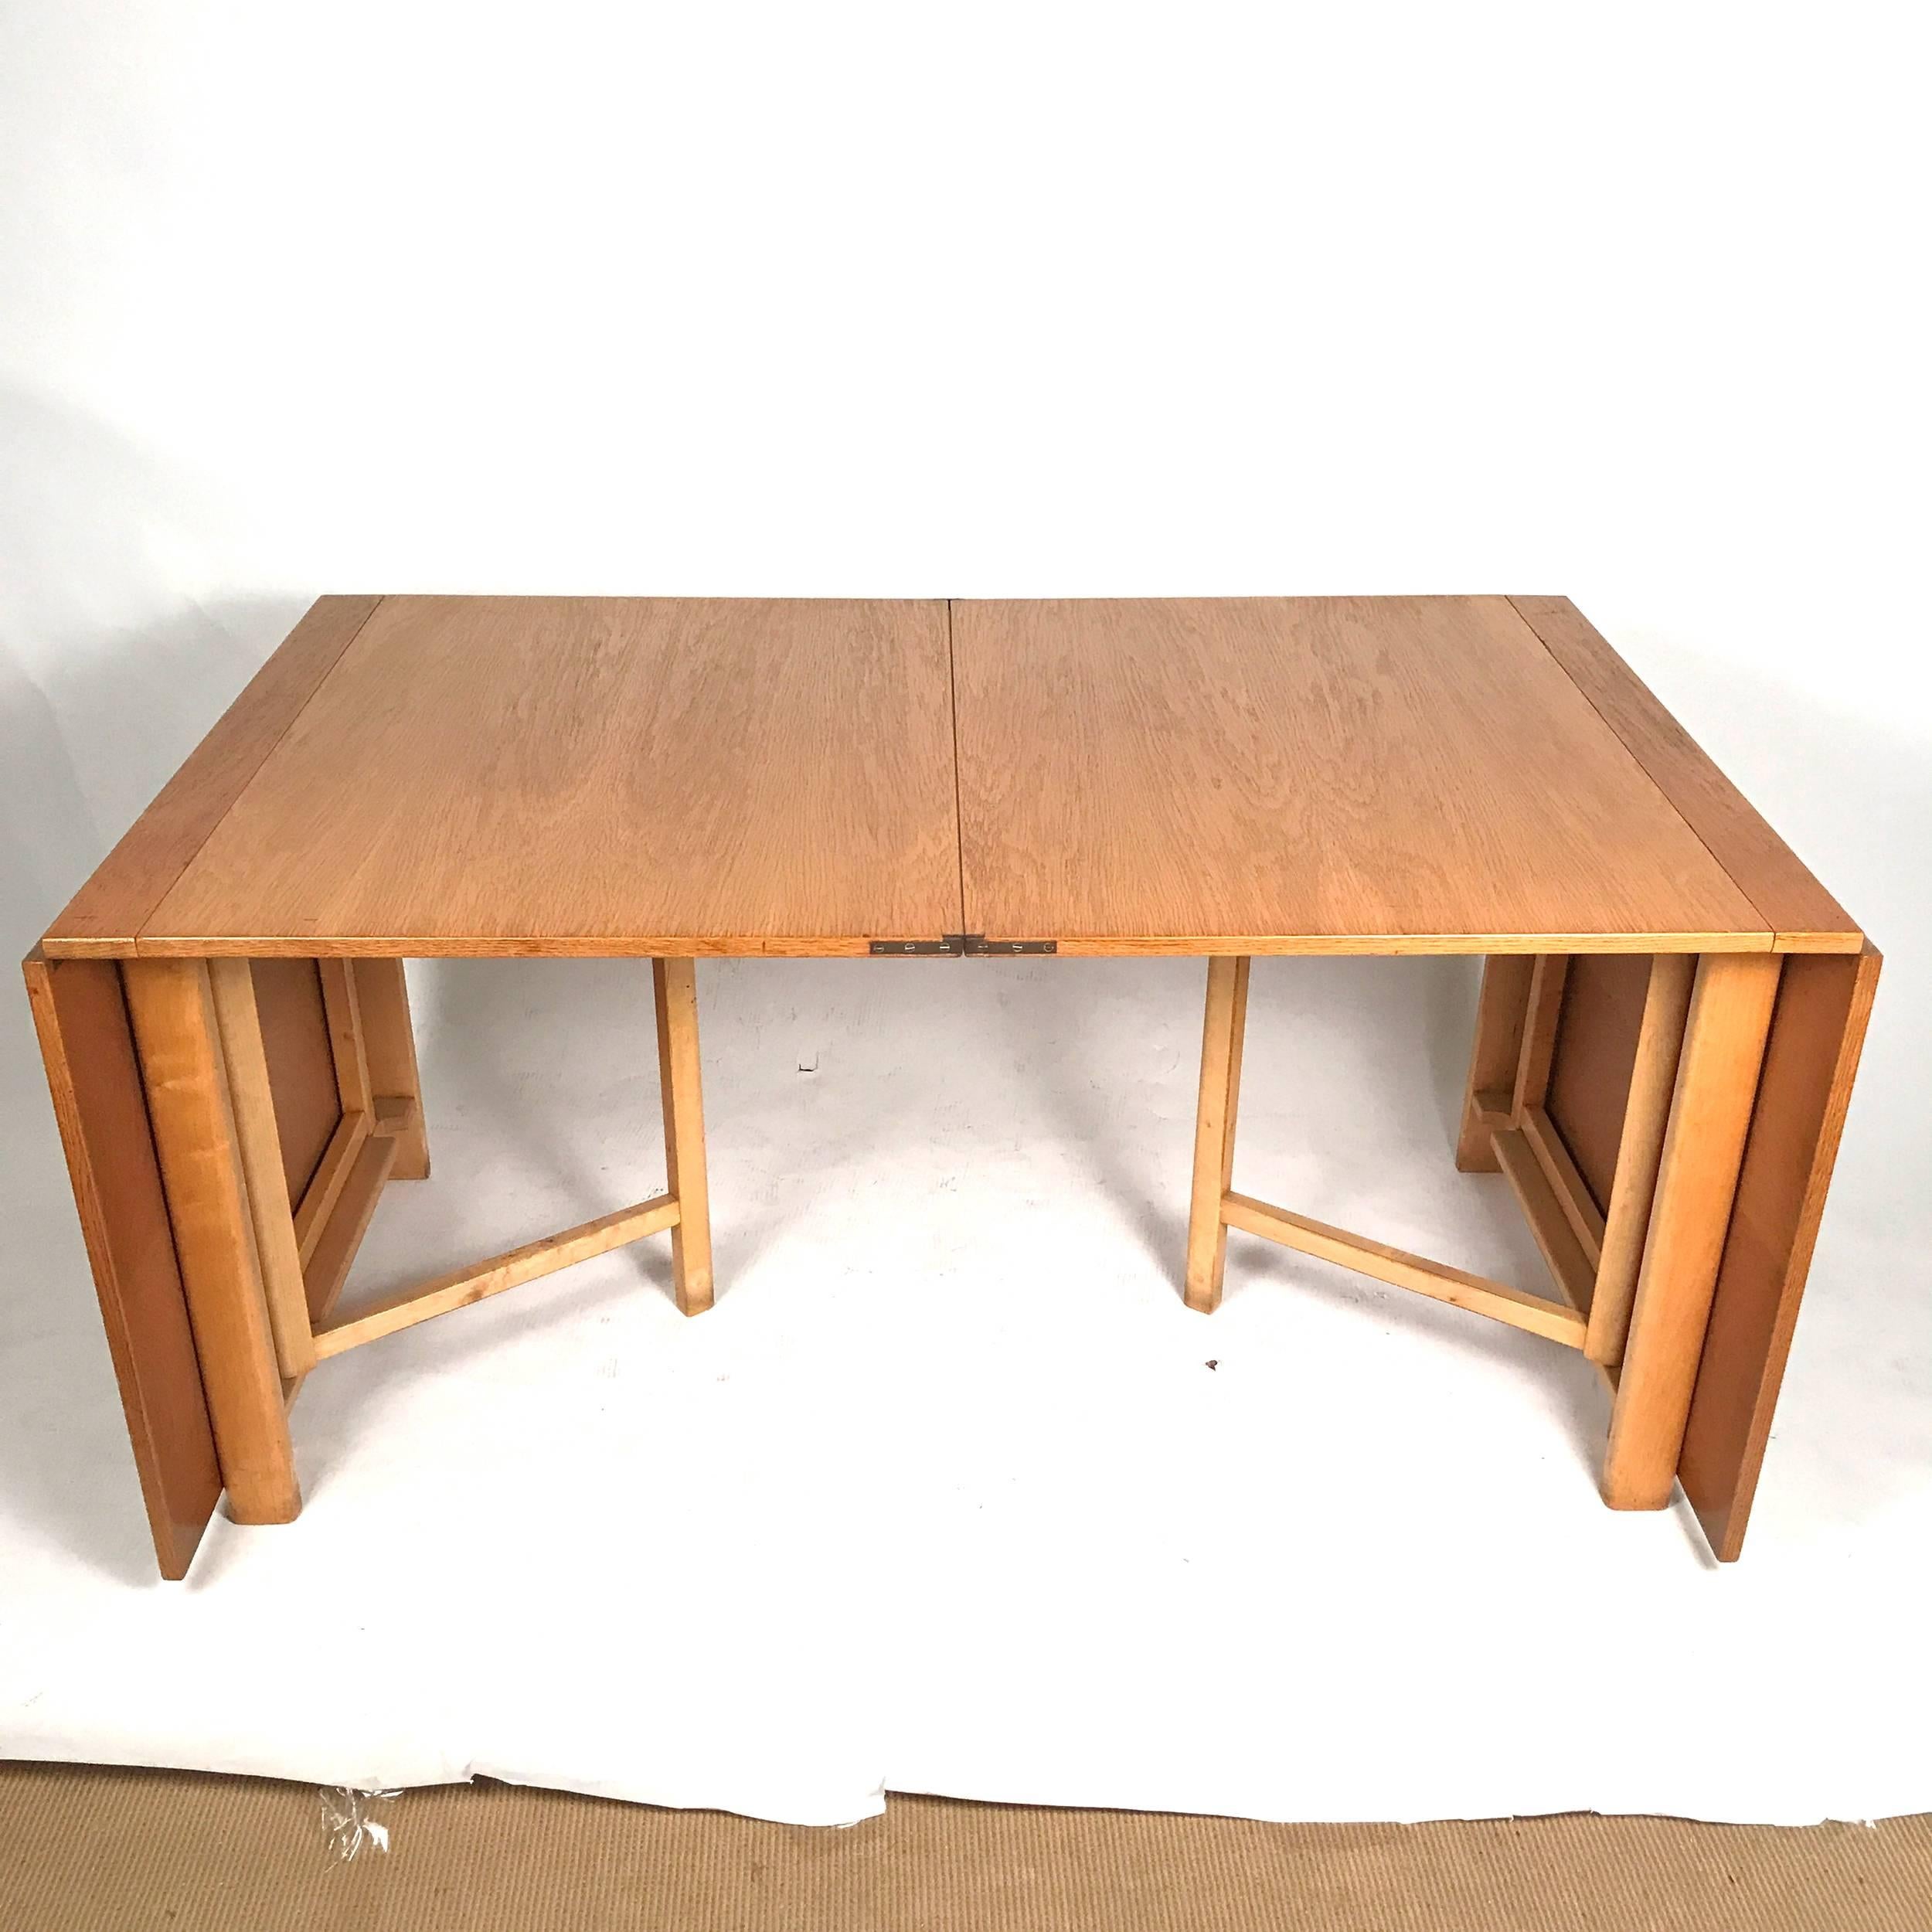 This is an early example from the late 1930s-1940s in oak with beech legs signed on retaining bar. A very versatile table that can seat up to ten or fold to a compact size, perfect for apartments or large dining rooms. The table measures 9.5 inches